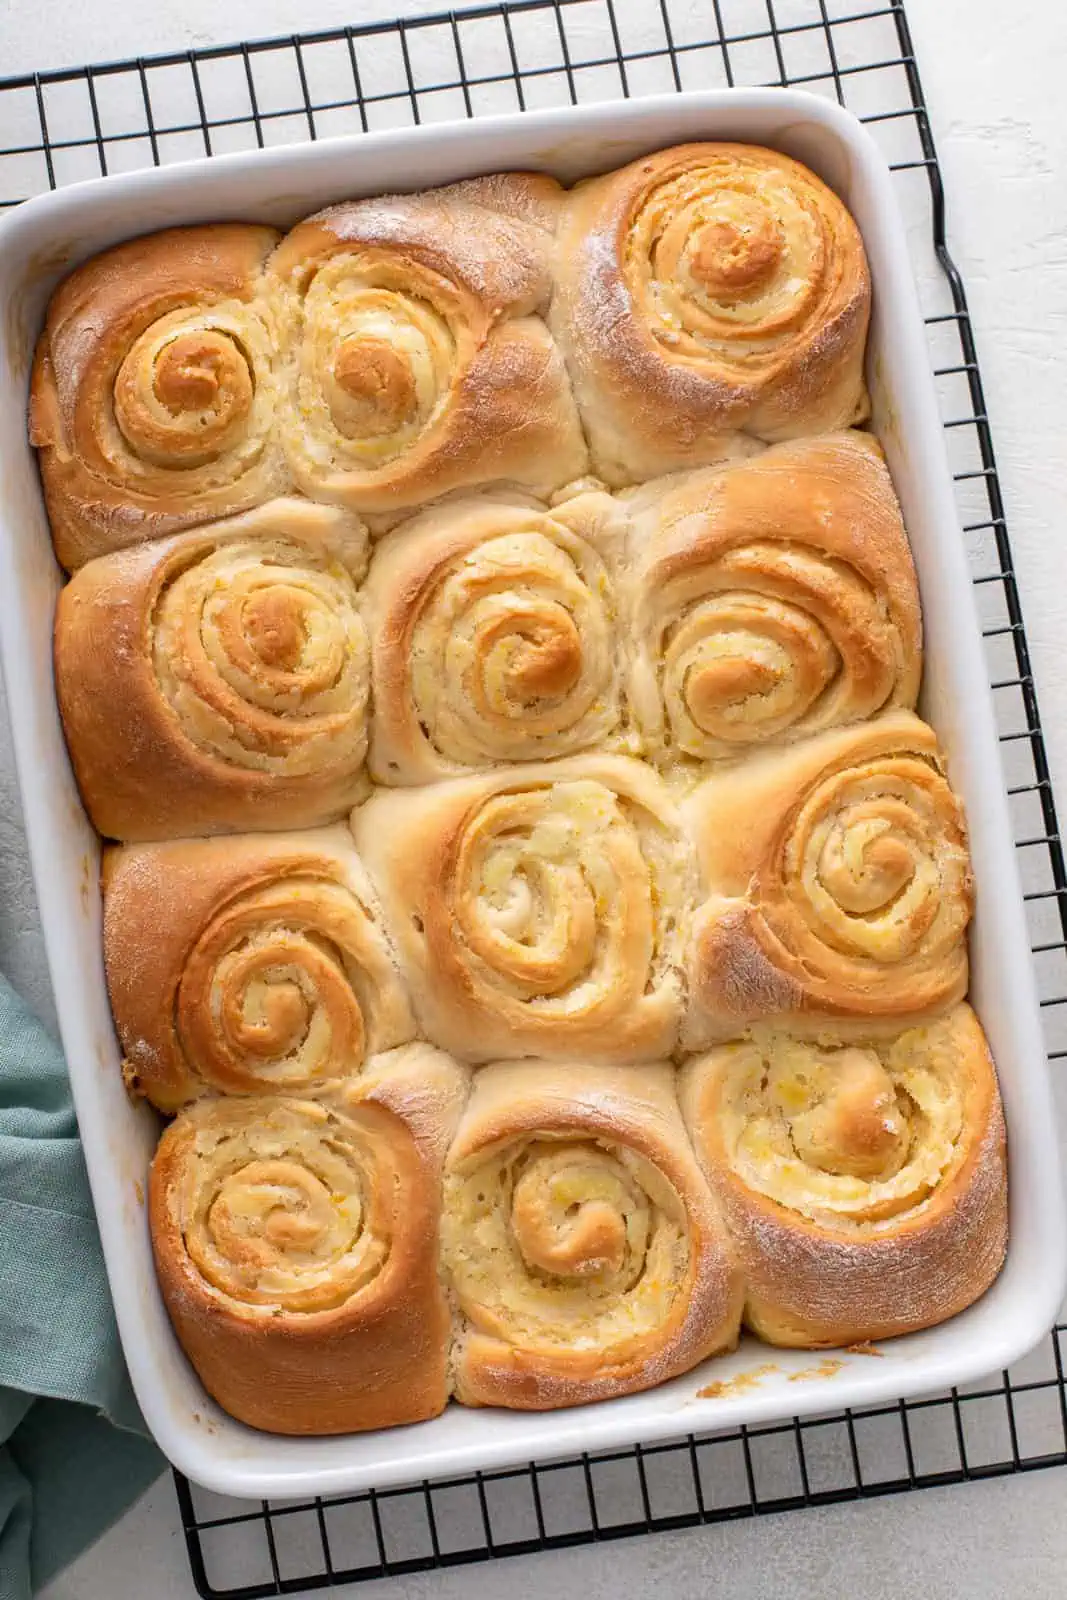 Baked orange rolls in a white baking dish set on a wire rack.